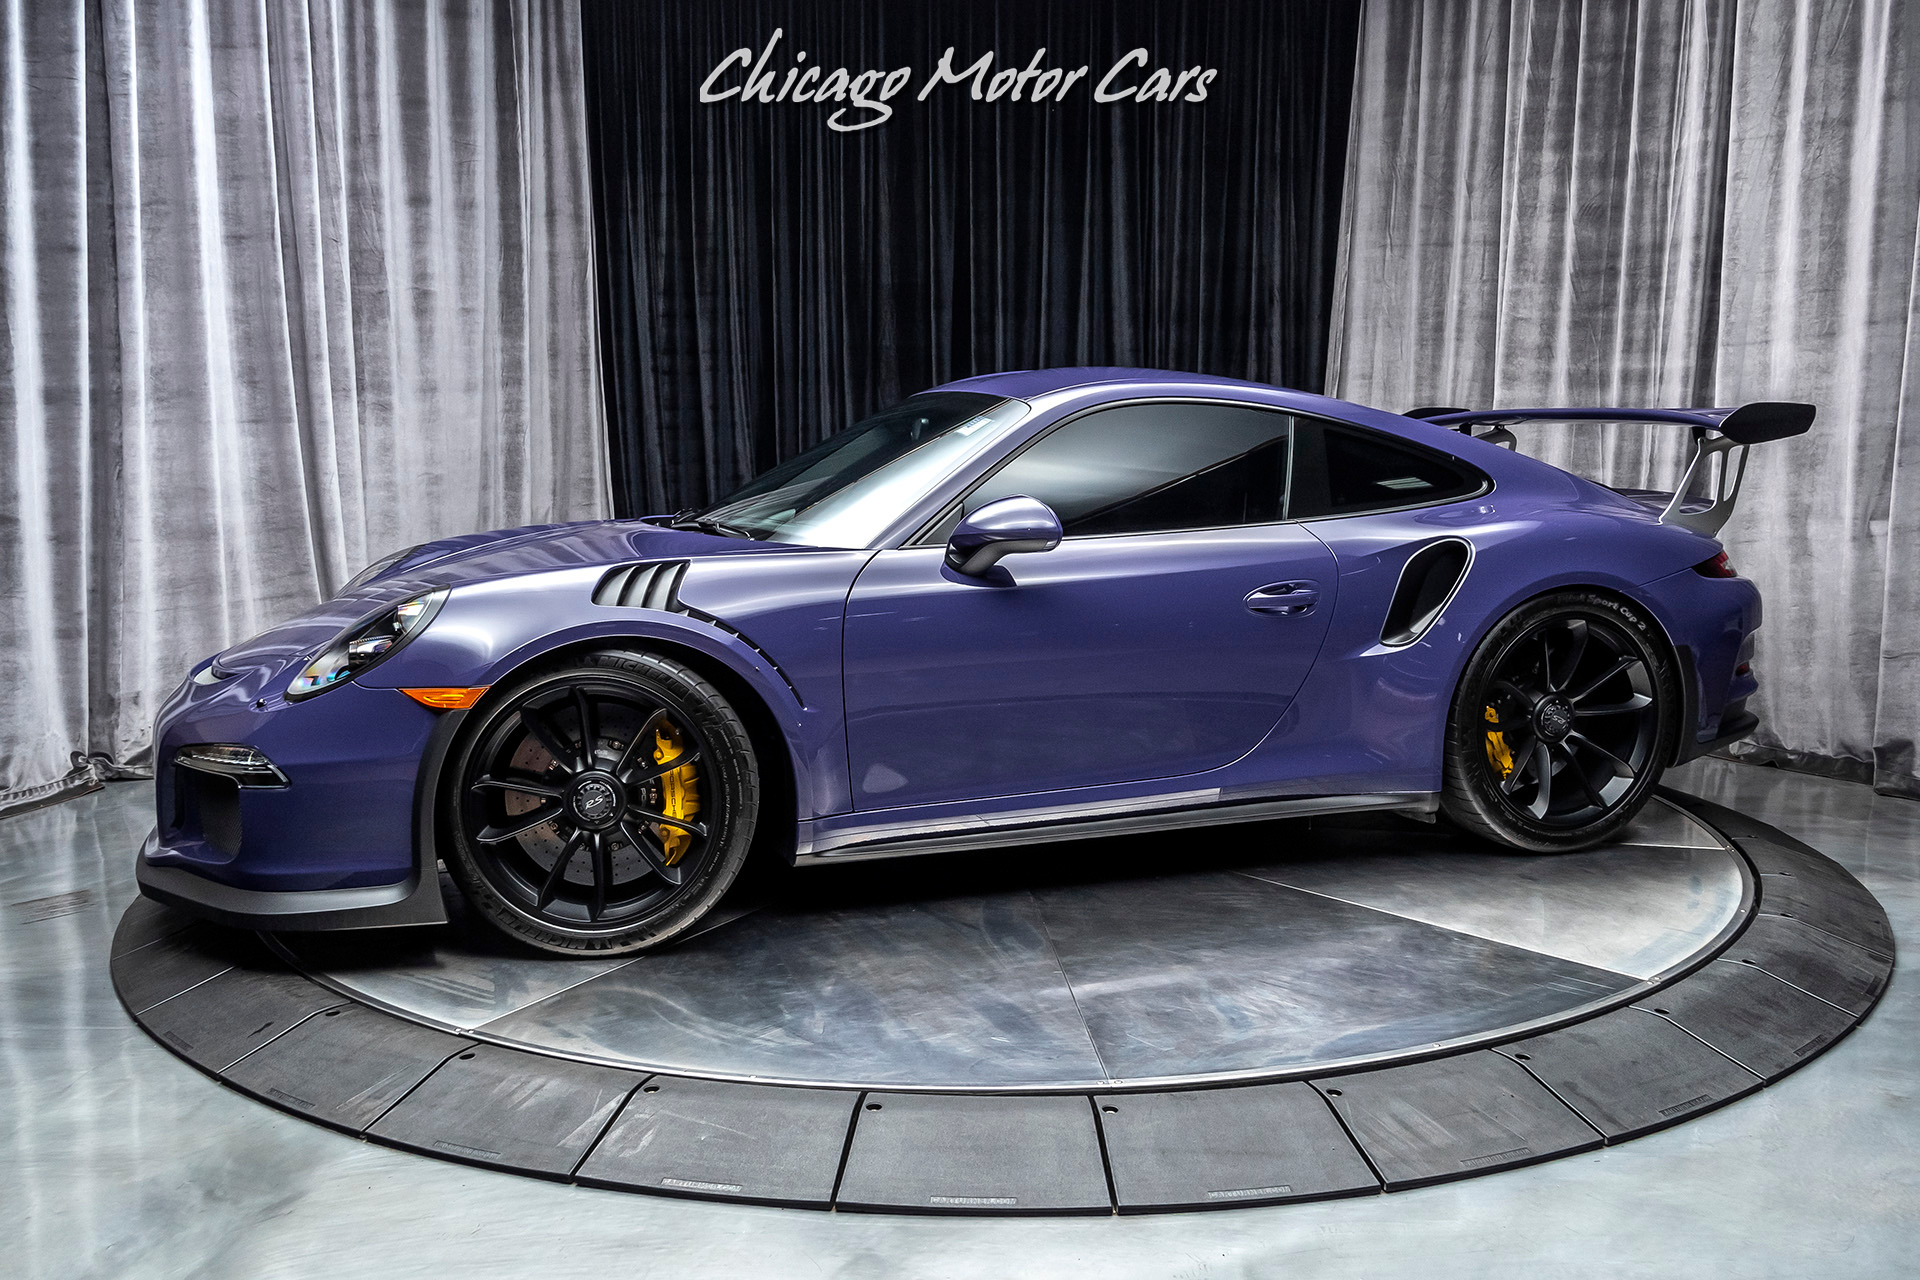 Used 2016 Porsche 911 991 GT3 RS Coupe Original MSRP $202K+ CERAMIC  COMPOSITE BRAKES! 2,900 MILES! For Sale (Special Pricing)